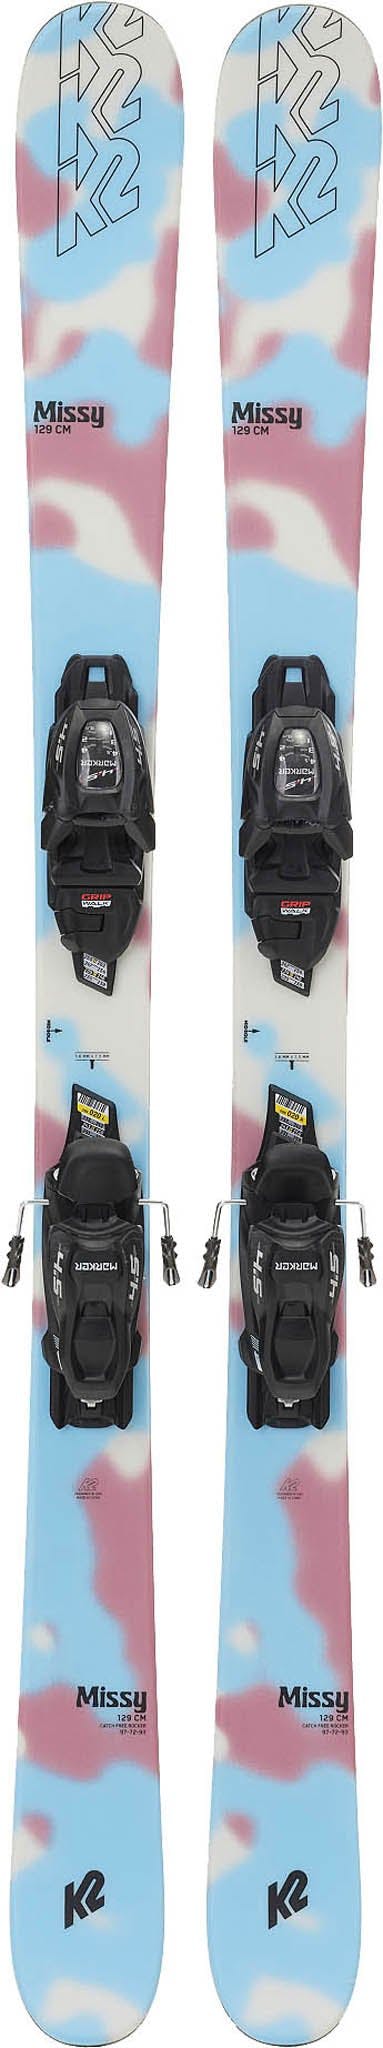 Product image for Missy 4.5 Fdt Ski - Youth